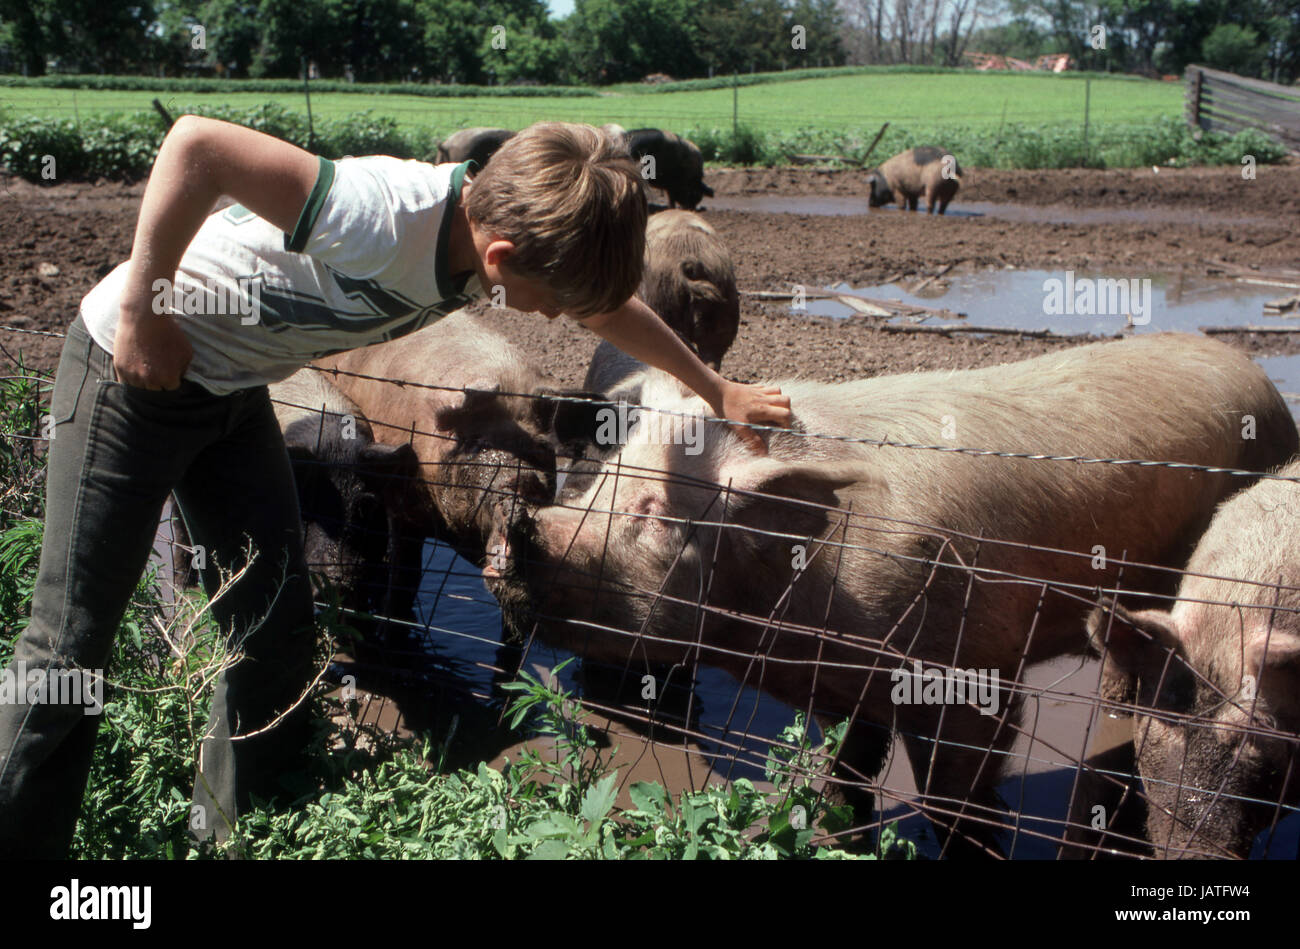 young boy petting a pig in the farmers field Stock Photo